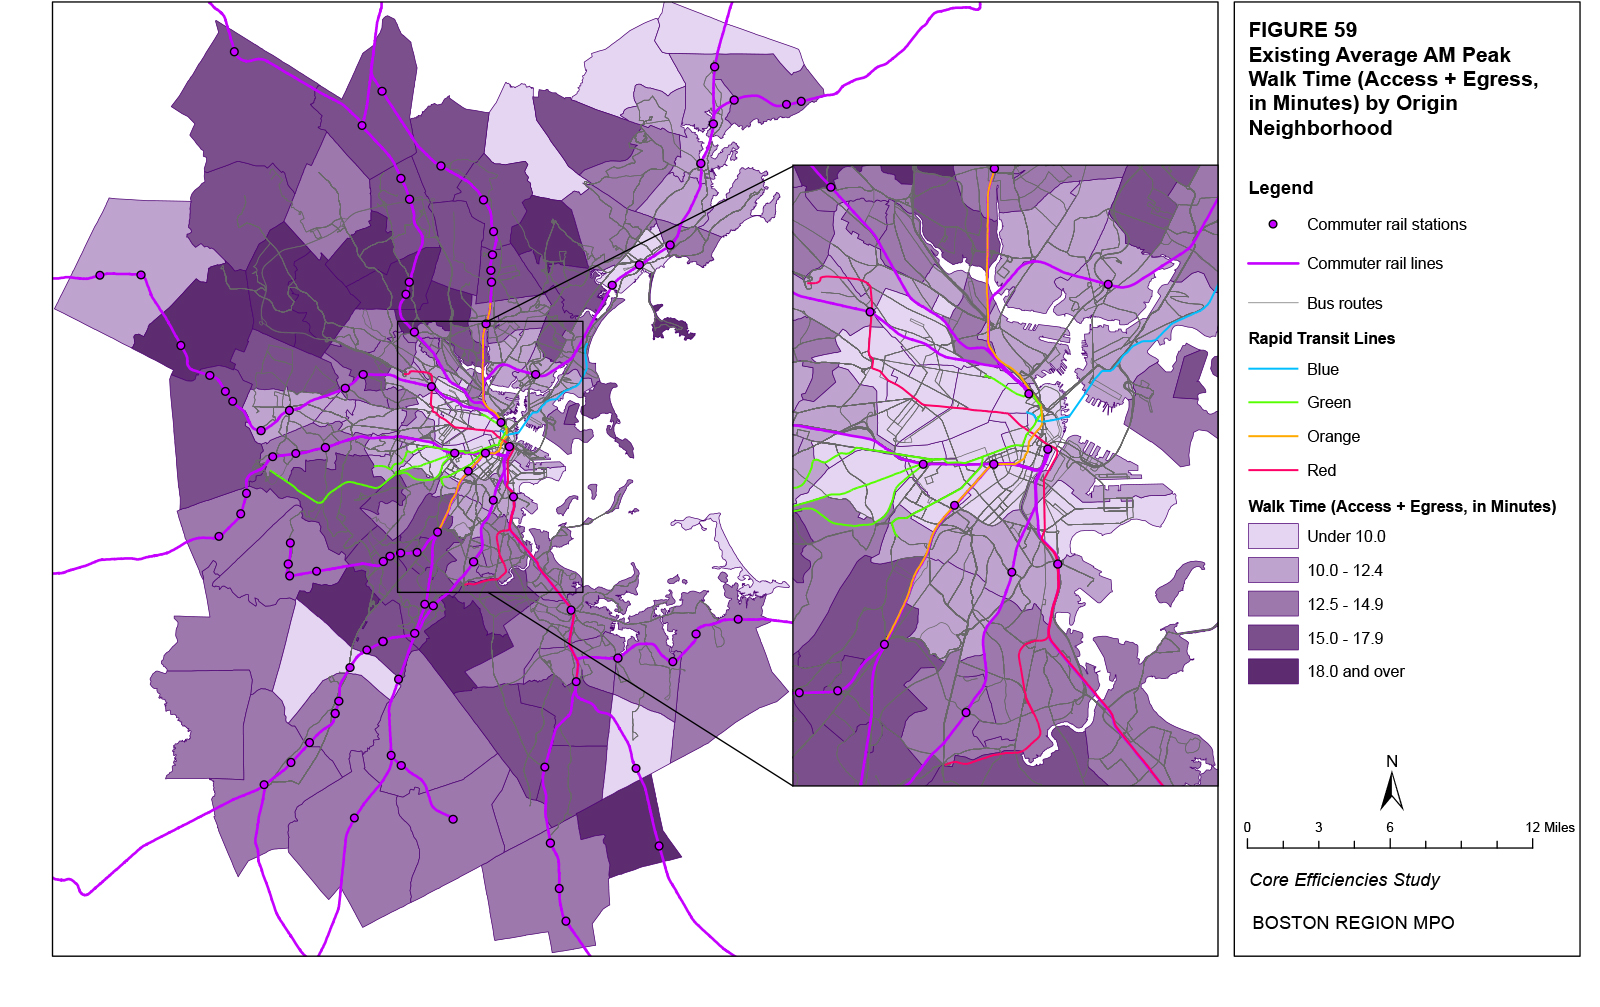 This map shows the existing average AM peak walk times for origin trips by neighborhood.